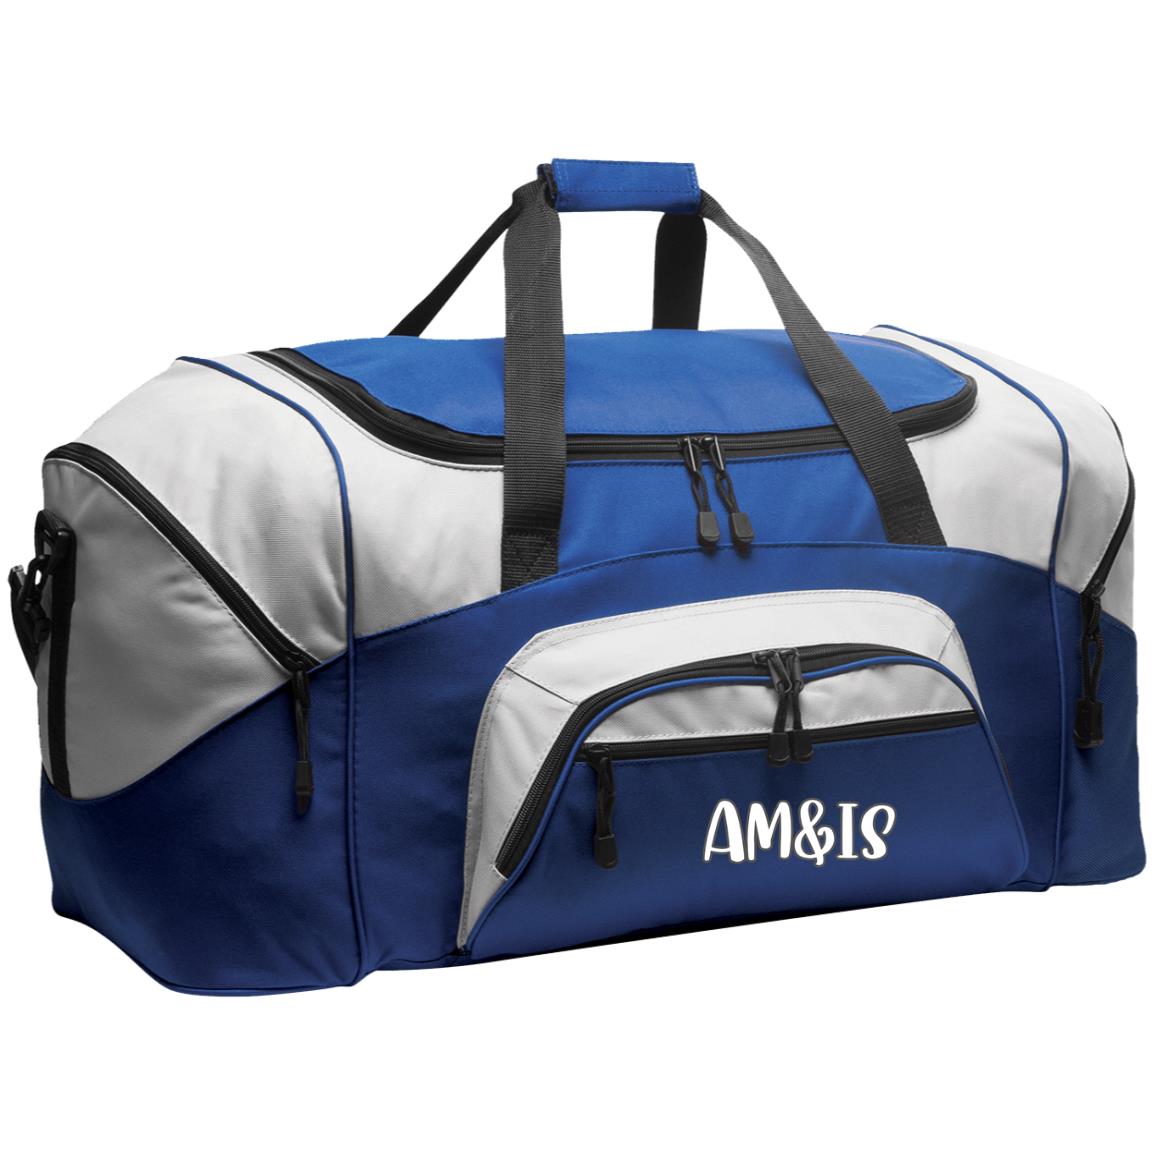 ROYAL/GRAY ONE SIZE - AM&IS Activewear Colorblock Sport Duffel - duffel bag at TFC&H Co.